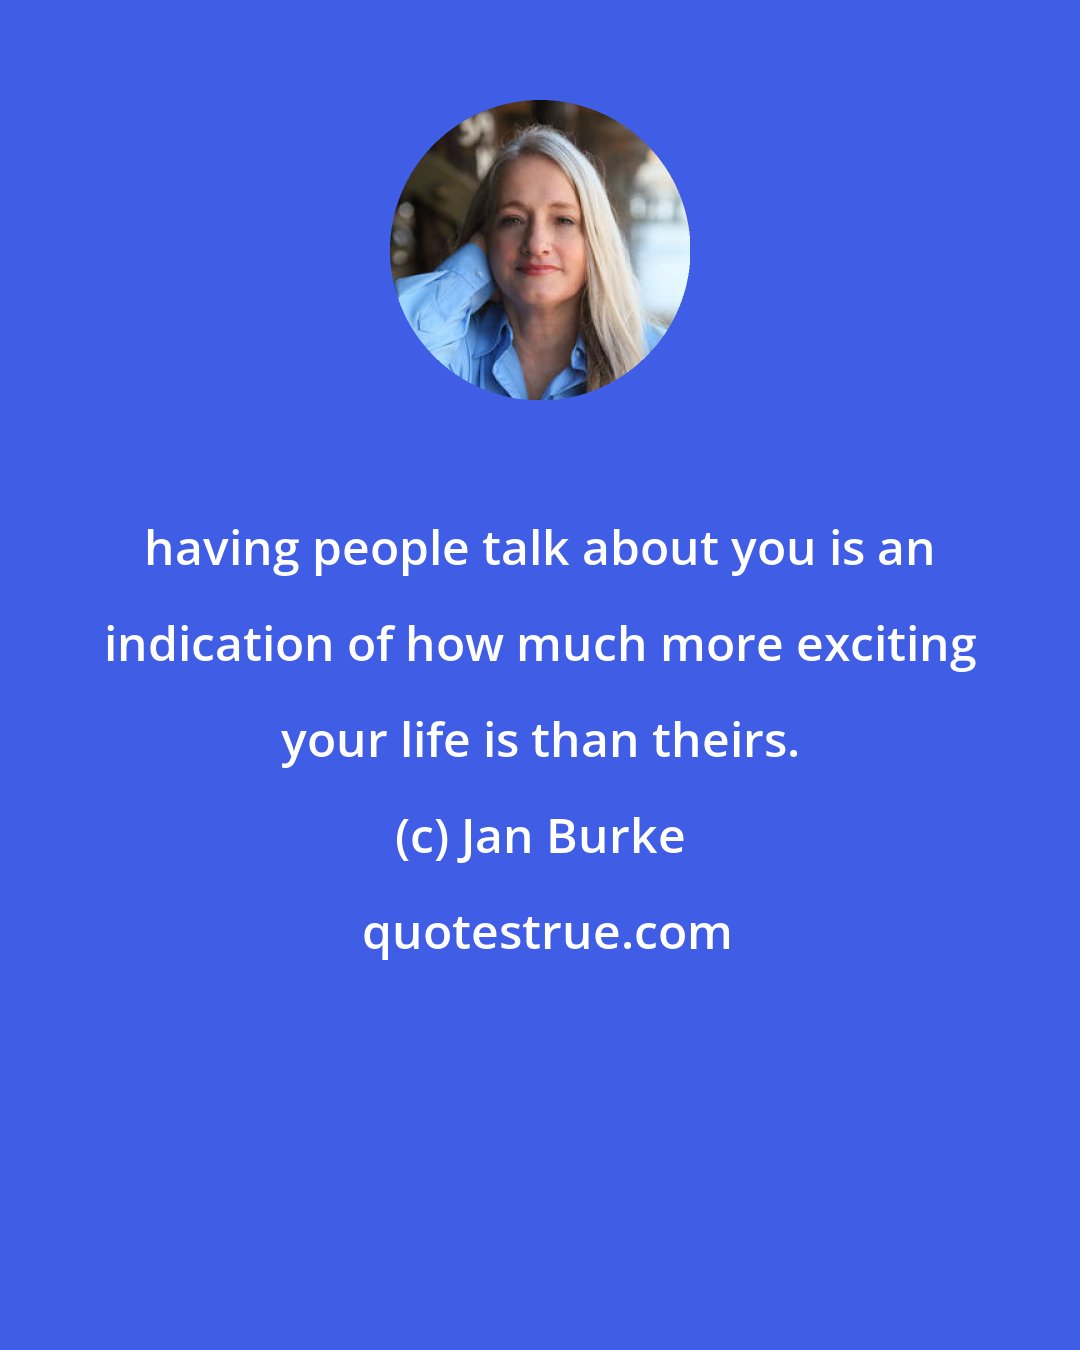 Jan Burke: having people talk about you is an indication of how much more exciting your life is than theirs.